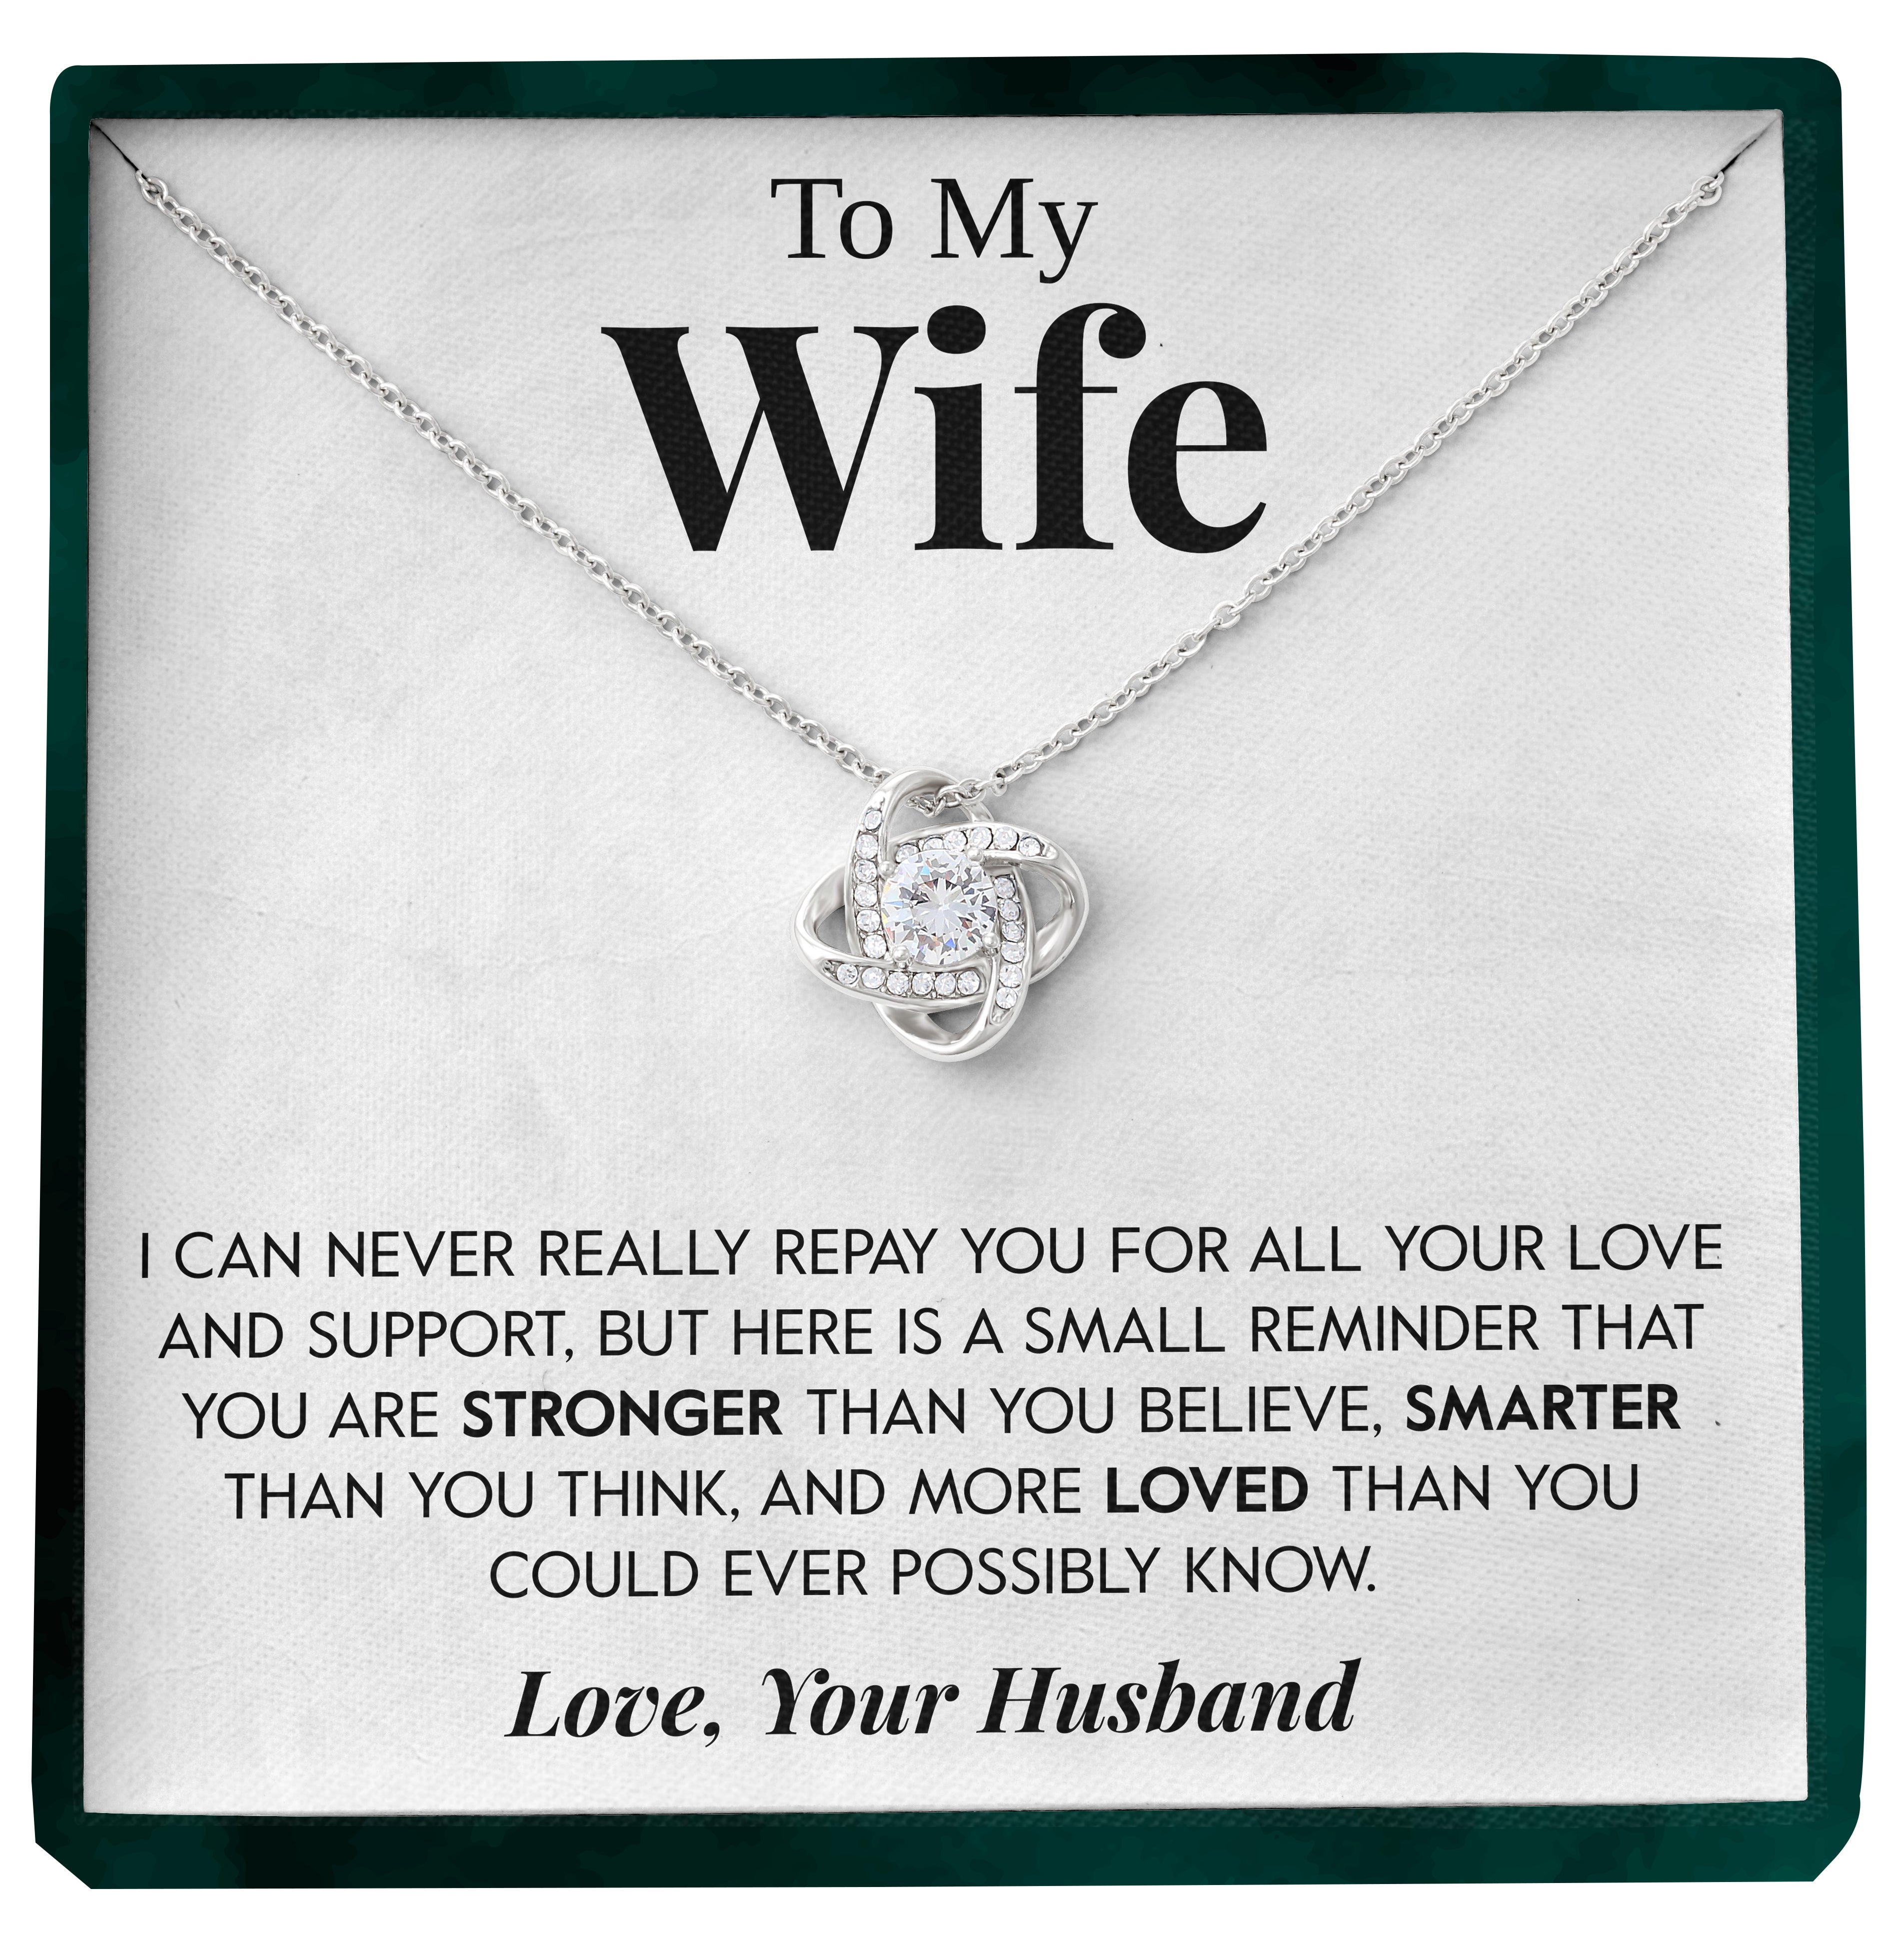 To My Wife | "Repay You" | Love Knot Necklace